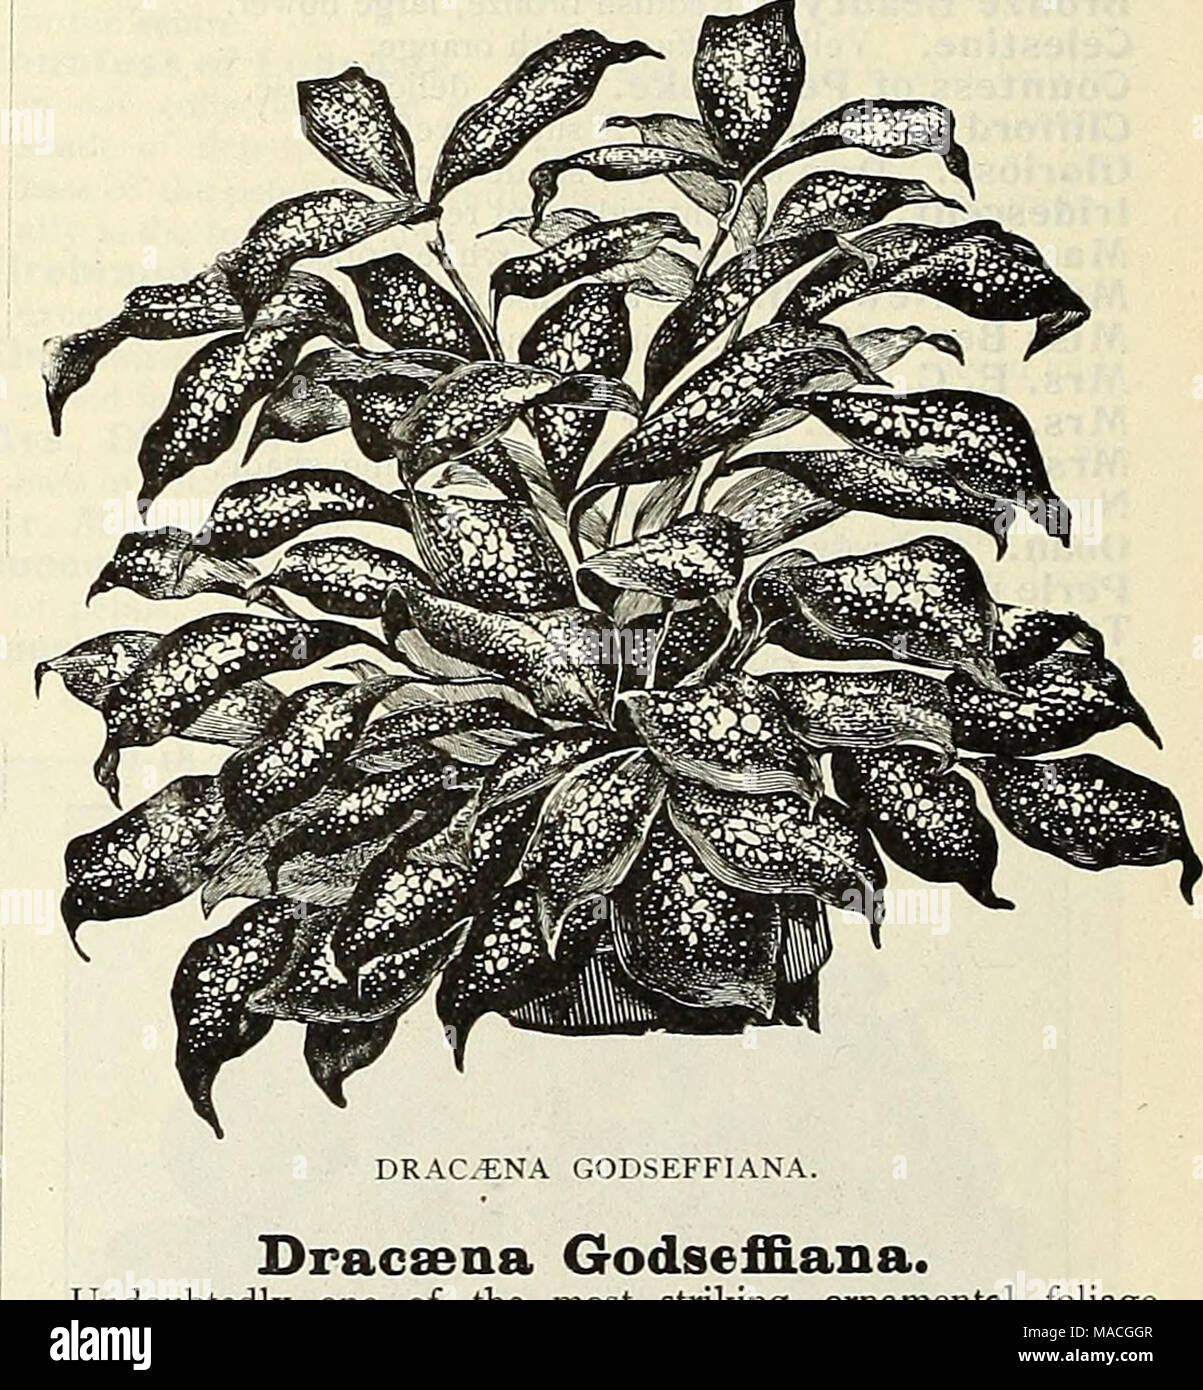 . Dreer's wholesale price list for 1902: flower seeds, bulbs, aquatics plants vegetable seeds, tools, implements, fertilizers, etc., etc . DRAC^NA GODSEFFIANA. Dracaena GodsefB.ana. Undoubtedly one of the most striking ornamental foliage plants of recent introduction. The plant is of an entirely differ- ent habit and appearance from all other Dracsenas. It is of free-branching habit, and throws out many suckers from the base so as to form beautiful, compact, graceful specimens in a very short time. Its foliage is broadly lanceolate, 5 to 6 inches long, and 2 to 3 inches wide, of a strong leath Stock Photo